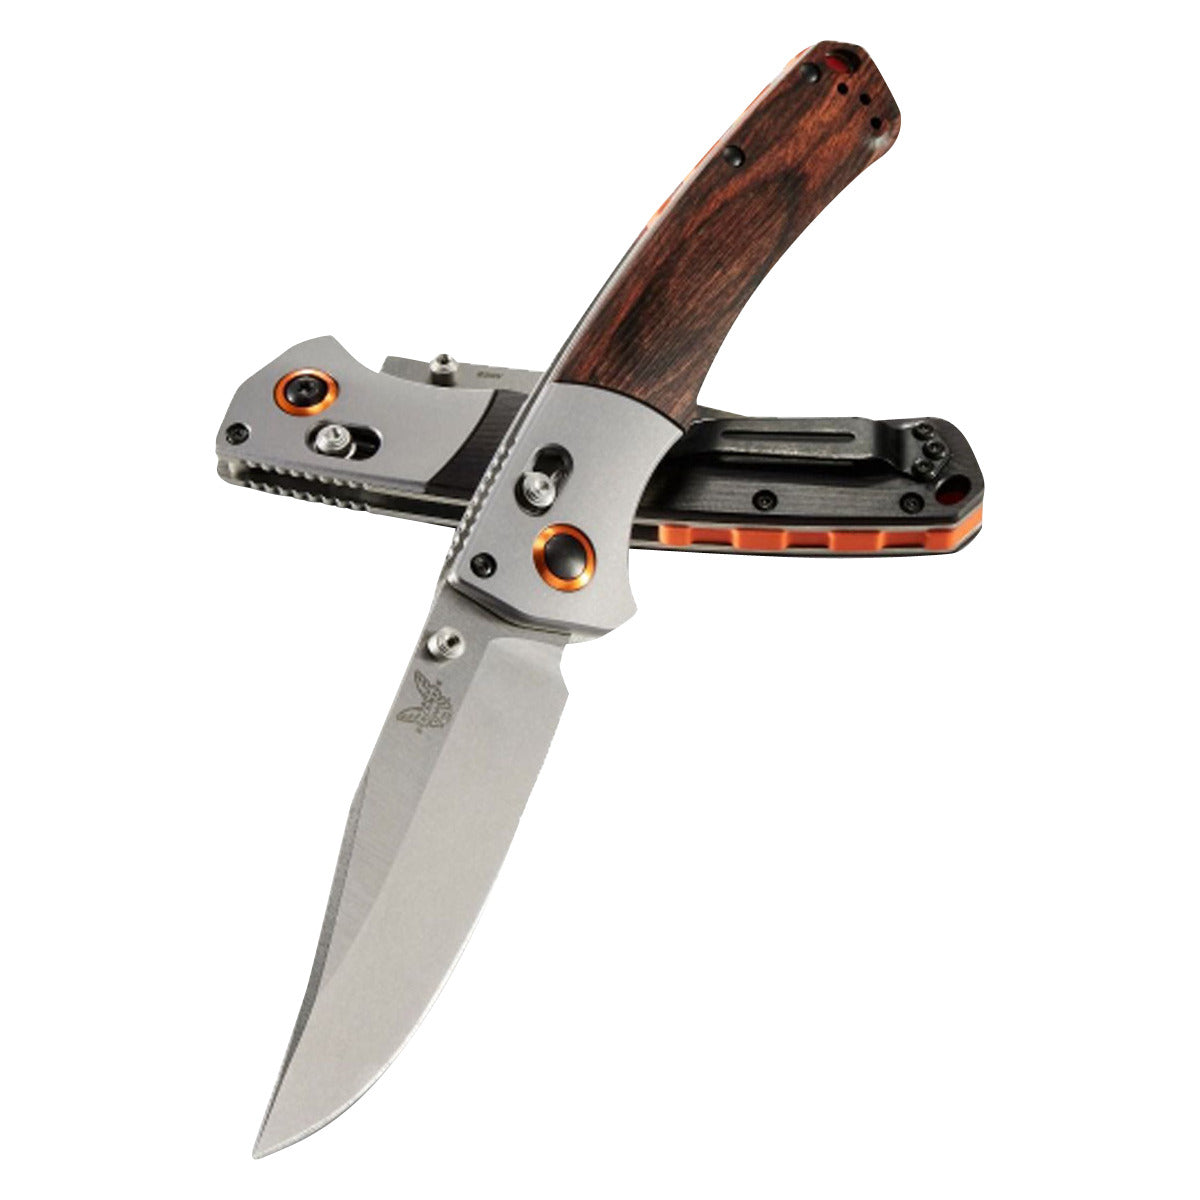 Benchmade 15080-2 Crooked River in  by GOHUNT | Benchmade - GOHUNT Shop